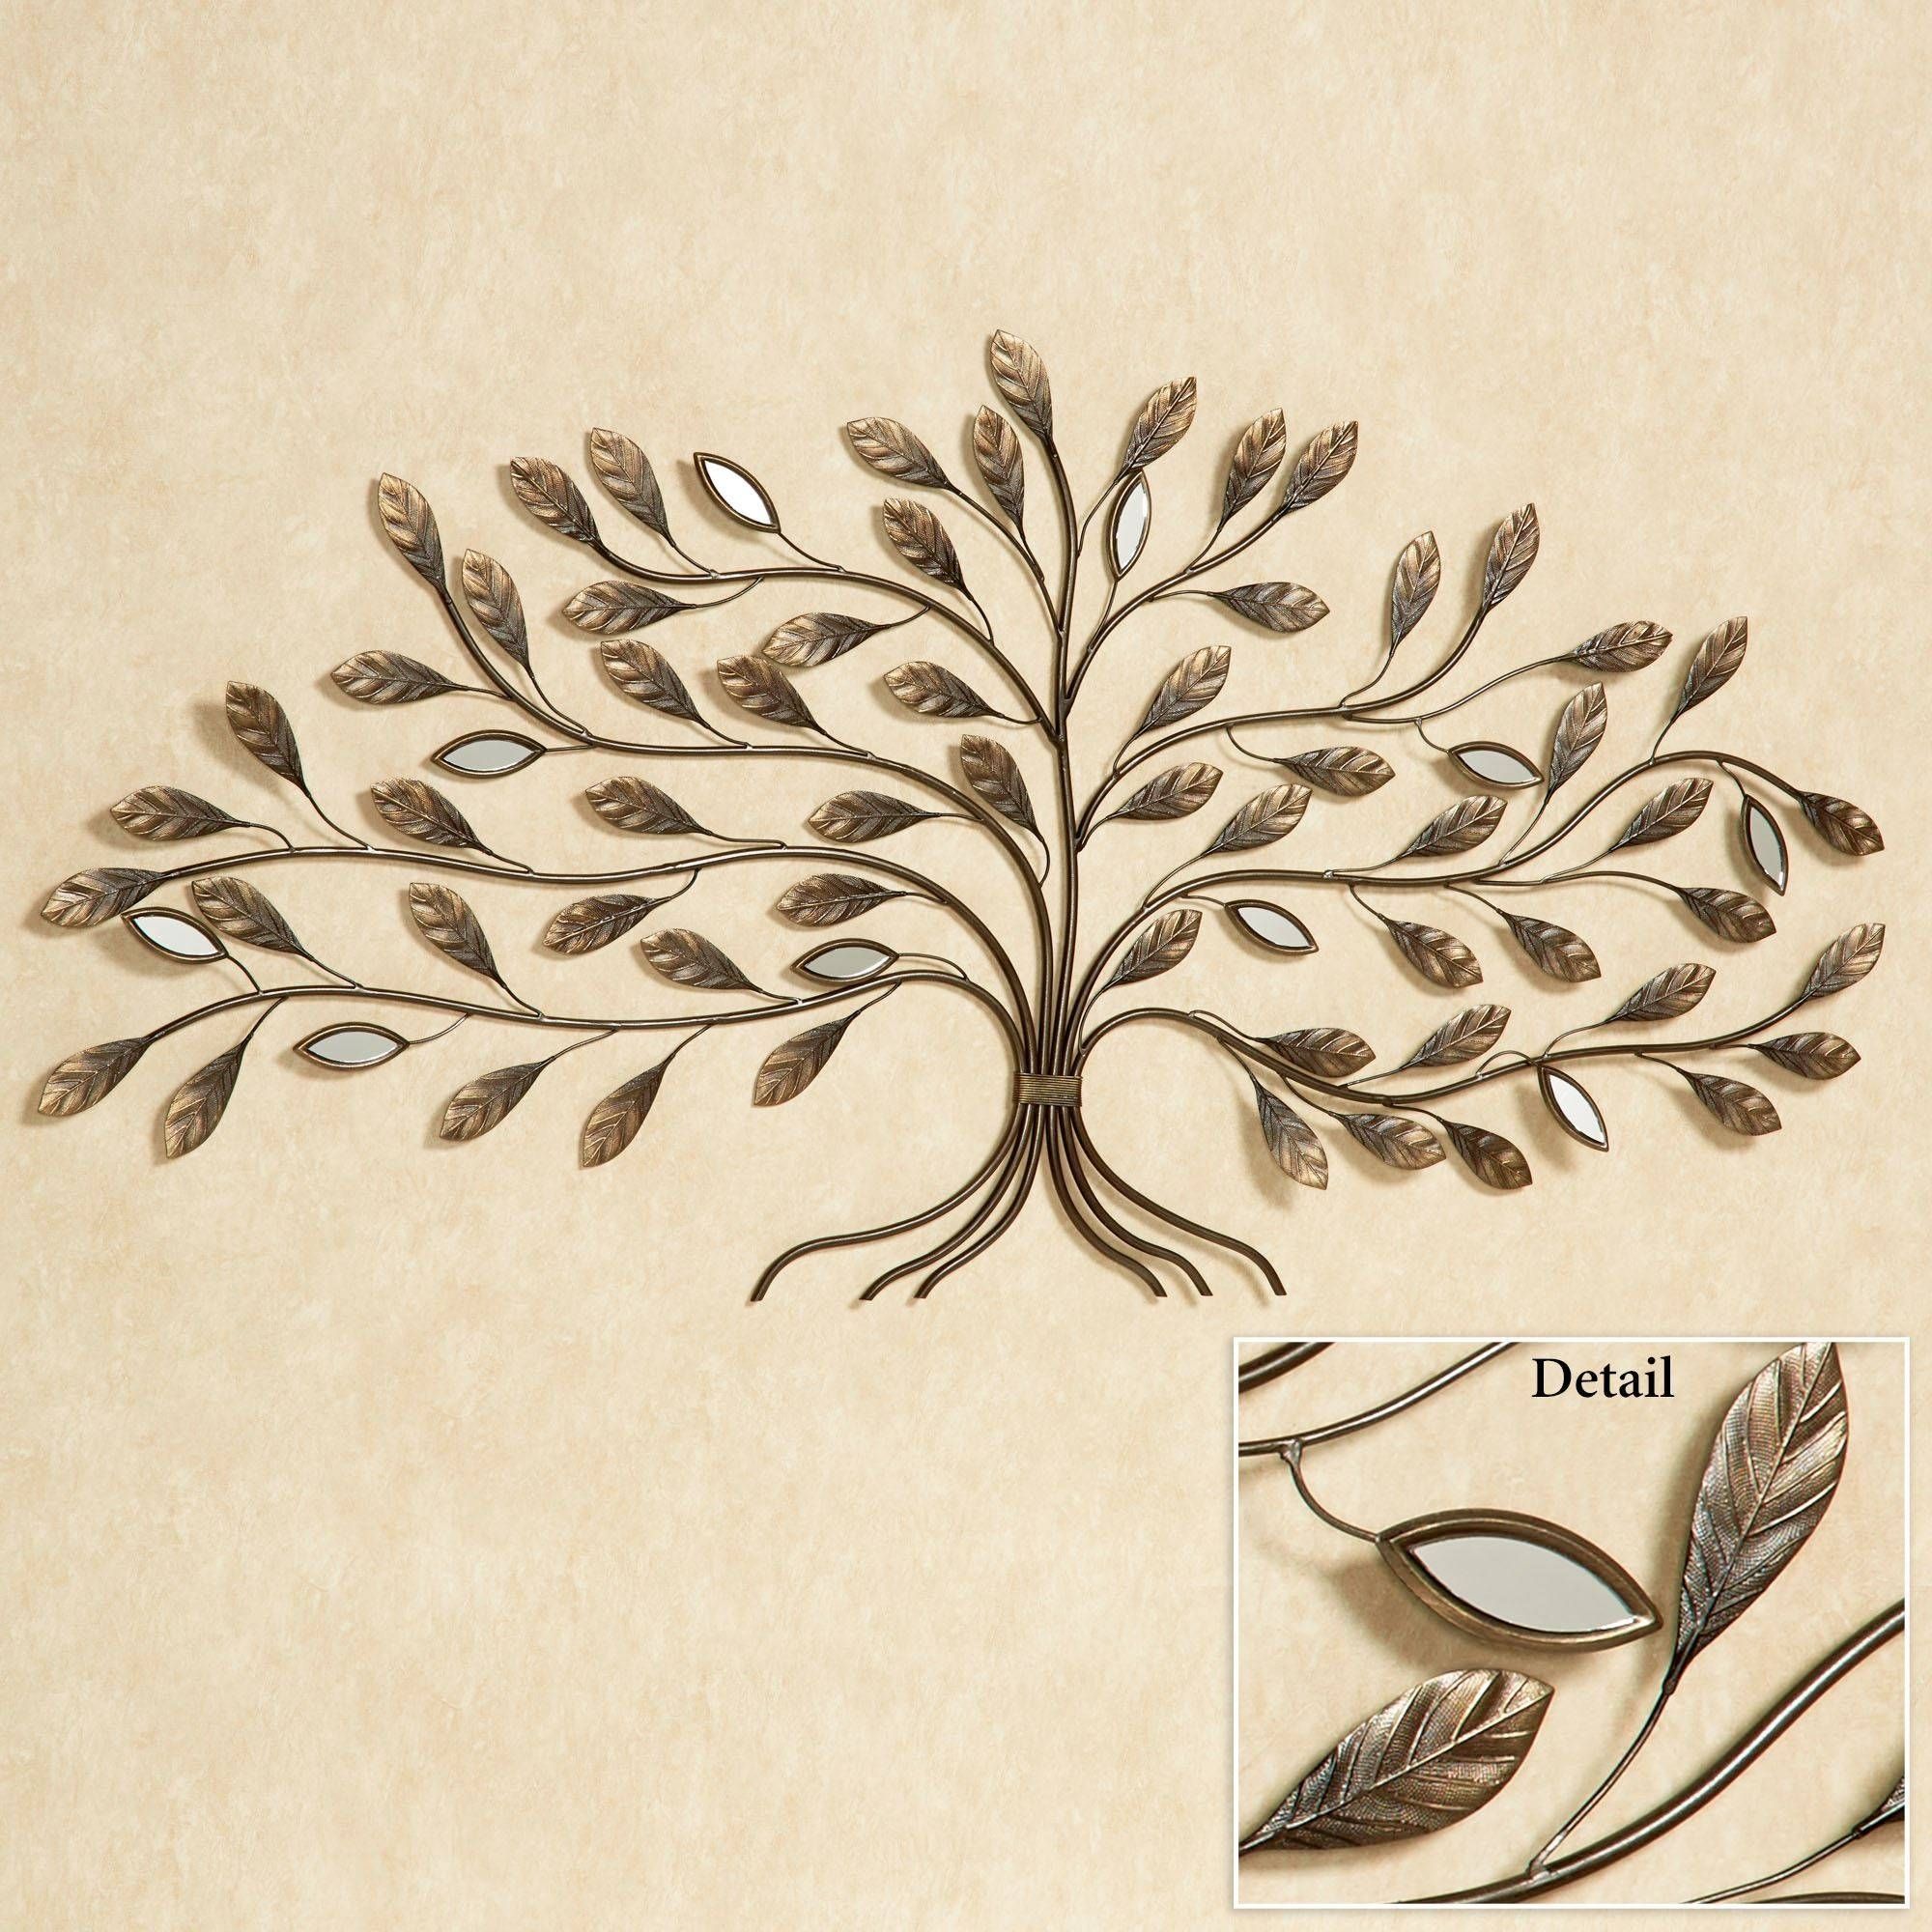 Marielle Tree Metal Wall Art Throughout Most Up To Date Metal Wall Art Trees And Leaves (View 10 of 20)